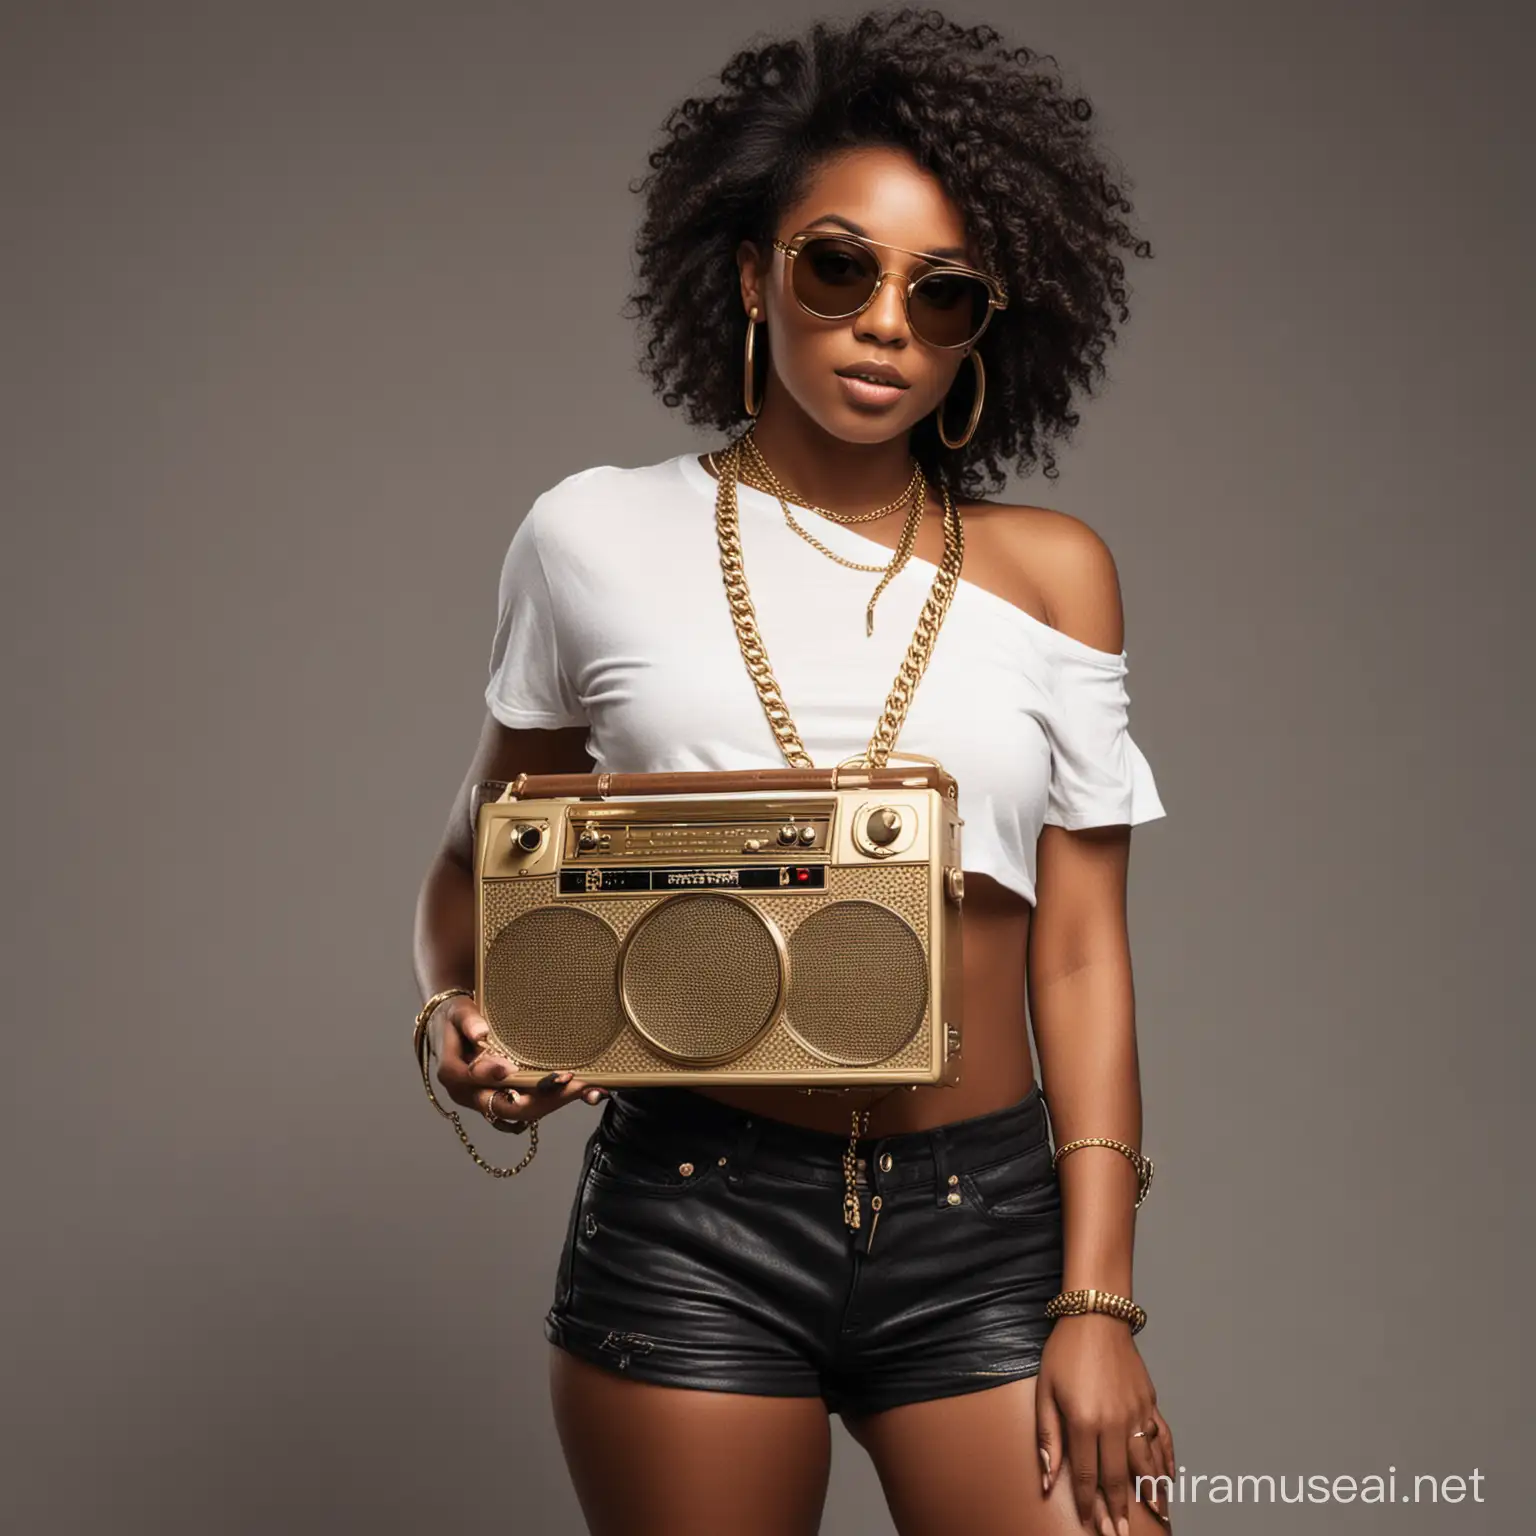 A dark skin female dj, cropped top, bomshorts, holding a big vintage radio on her shoulder, dark shades glasses, swag, gold chain, full body view